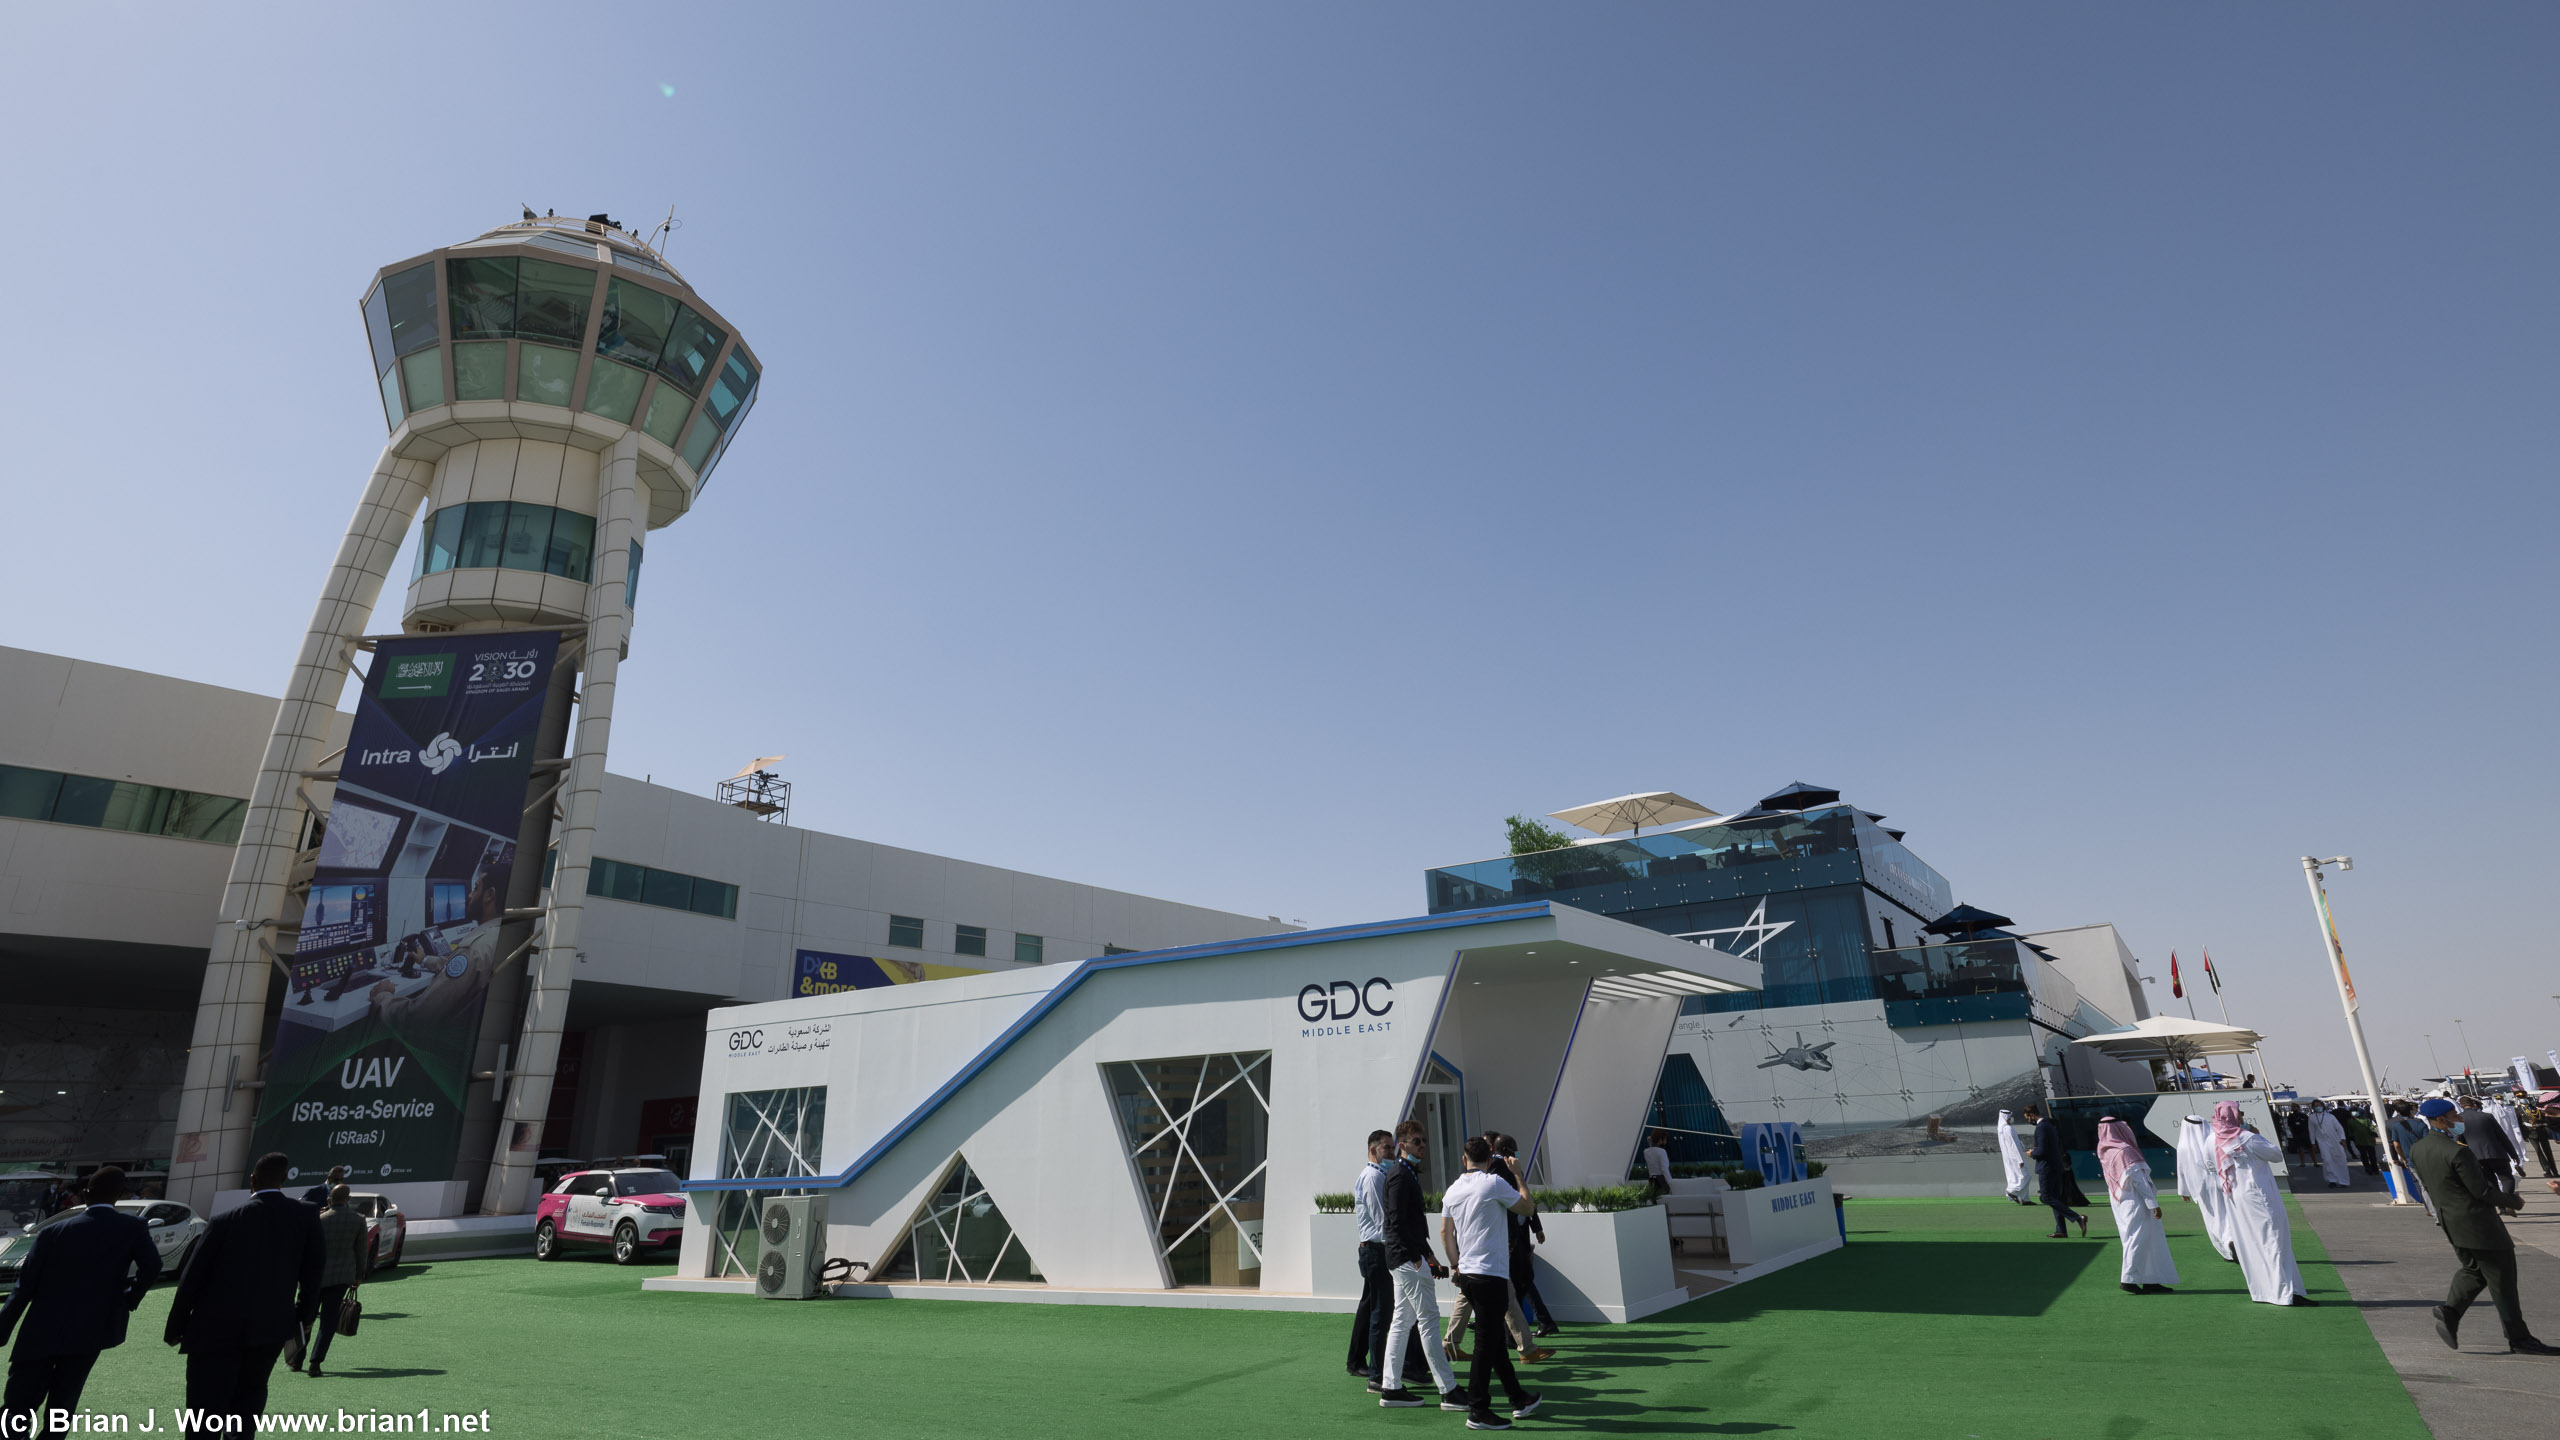 Outdoor display area of the Dubai Airshow.